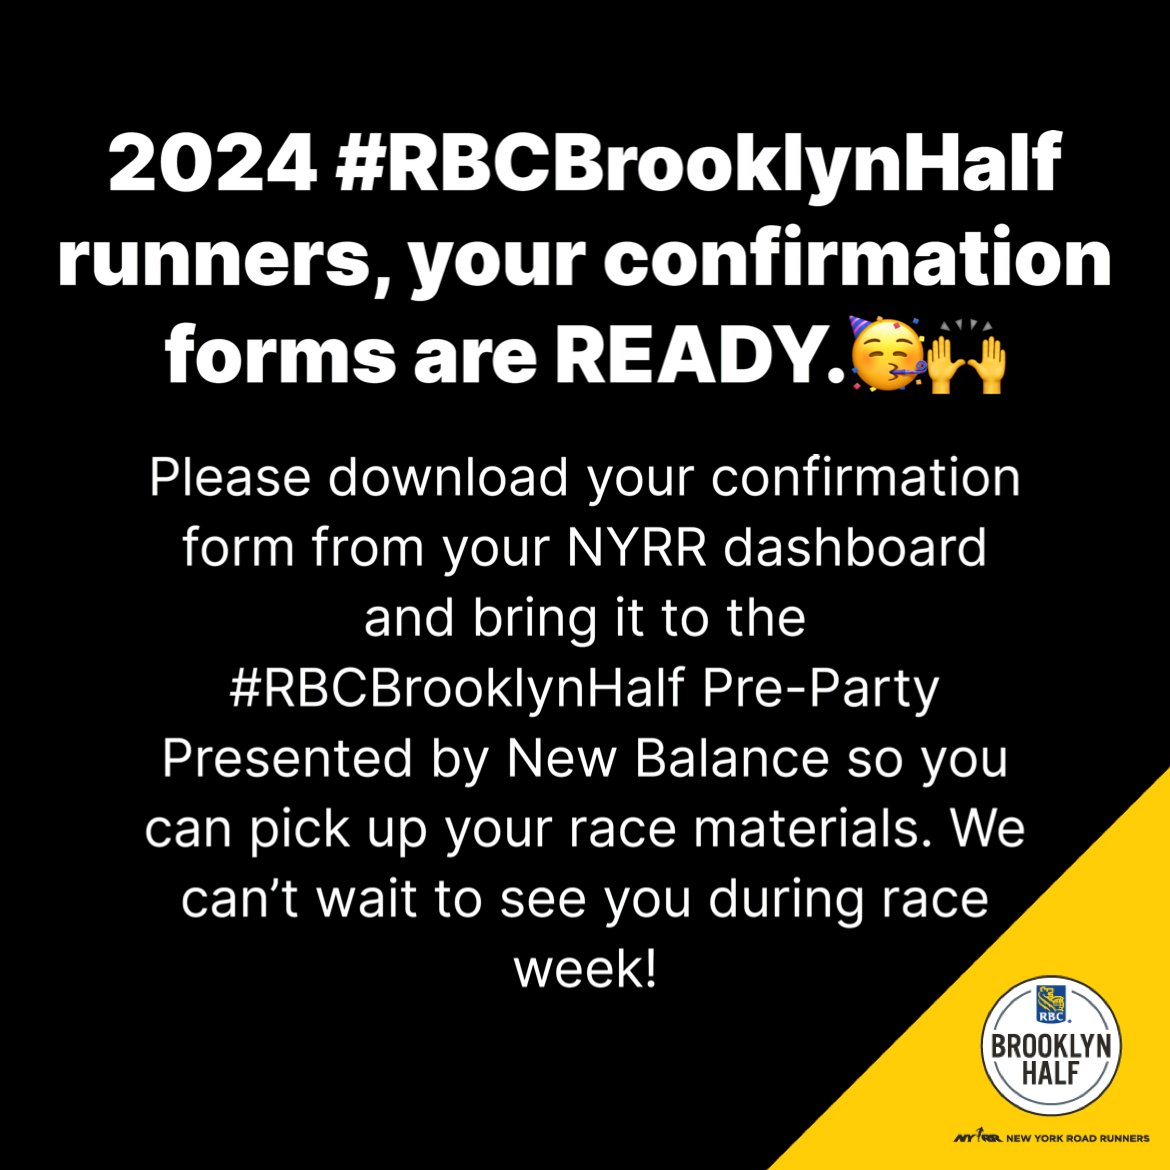 2024 #RBCBrooklynHalf runners, your confirmation forms are READY.🥳 Please download your confirmation form from your NYRR dashboard and bring it to the #RBCBrooklynHalf Pre-Party Presented by New Balance so you can pick up your race materials. Learn more: bit.ly/3wjtFgO